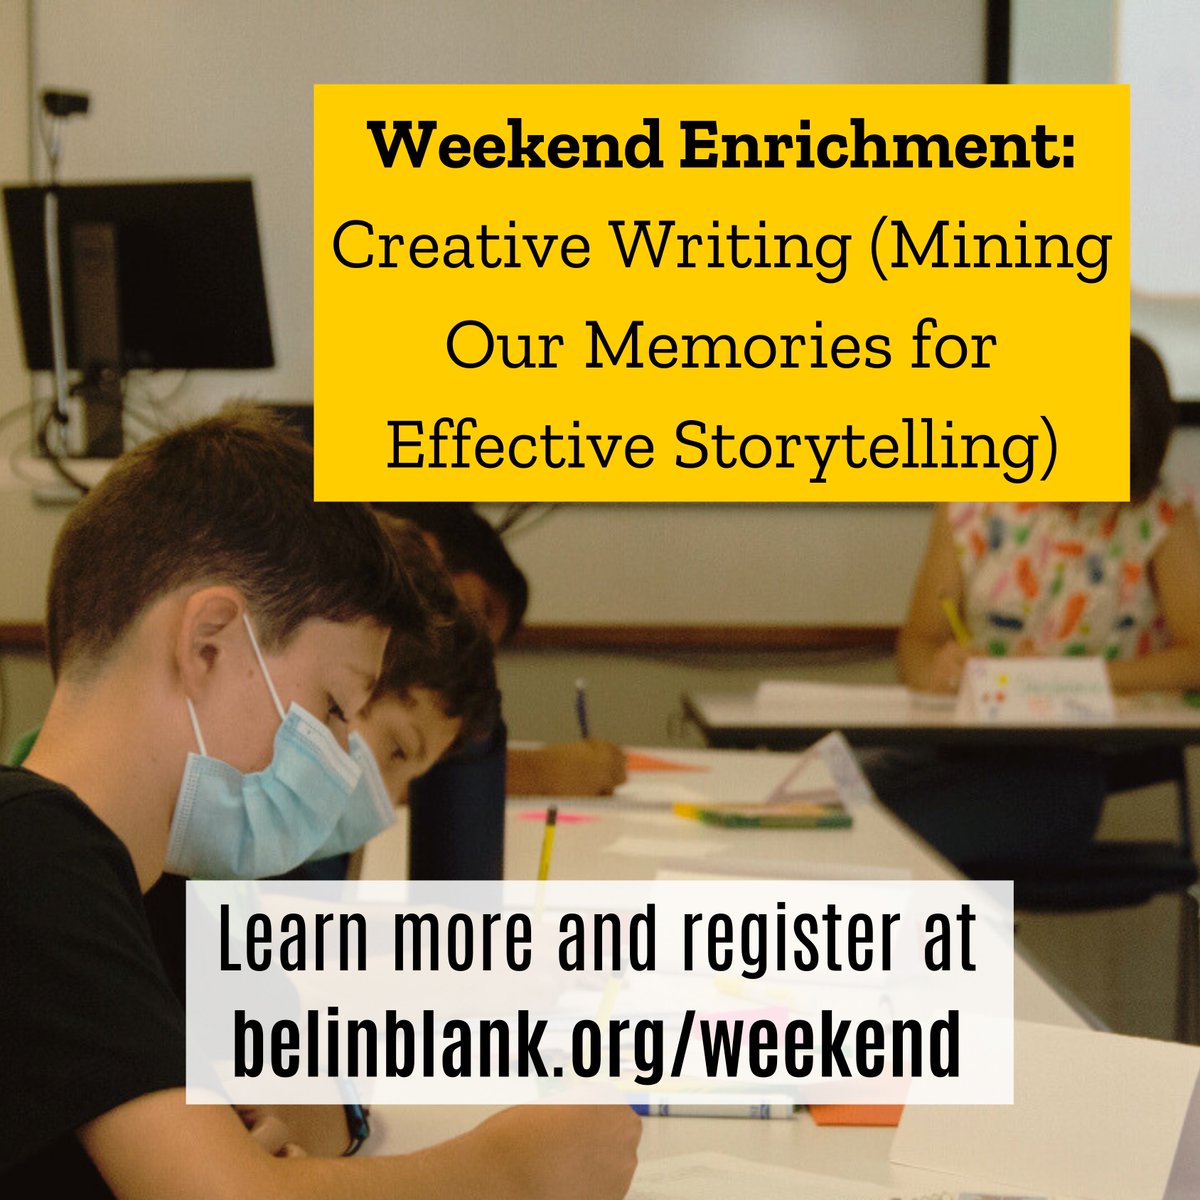 In case you missed it: We still have spots open in our upcoming Weekend Enrichment program! Visit belinblank.org/weekend/ for more information.